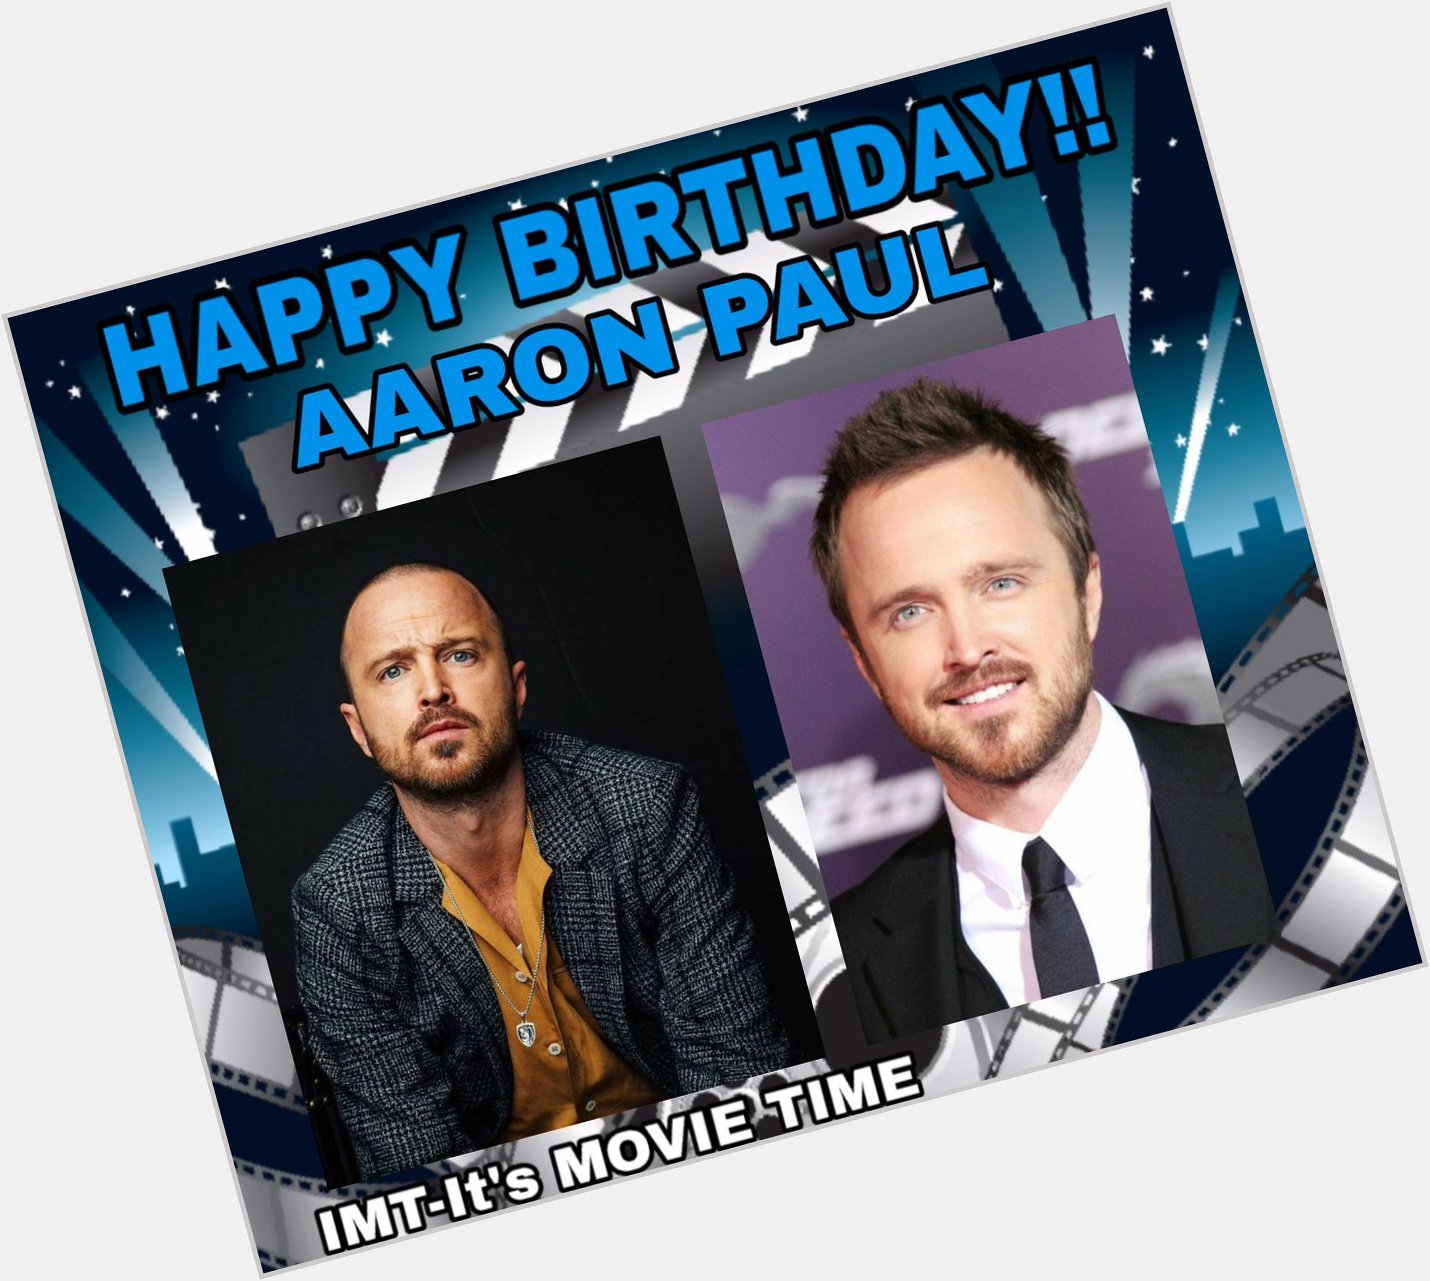 Happy Birthday to Aaron Paul! The actor is celebrating 41 years. 